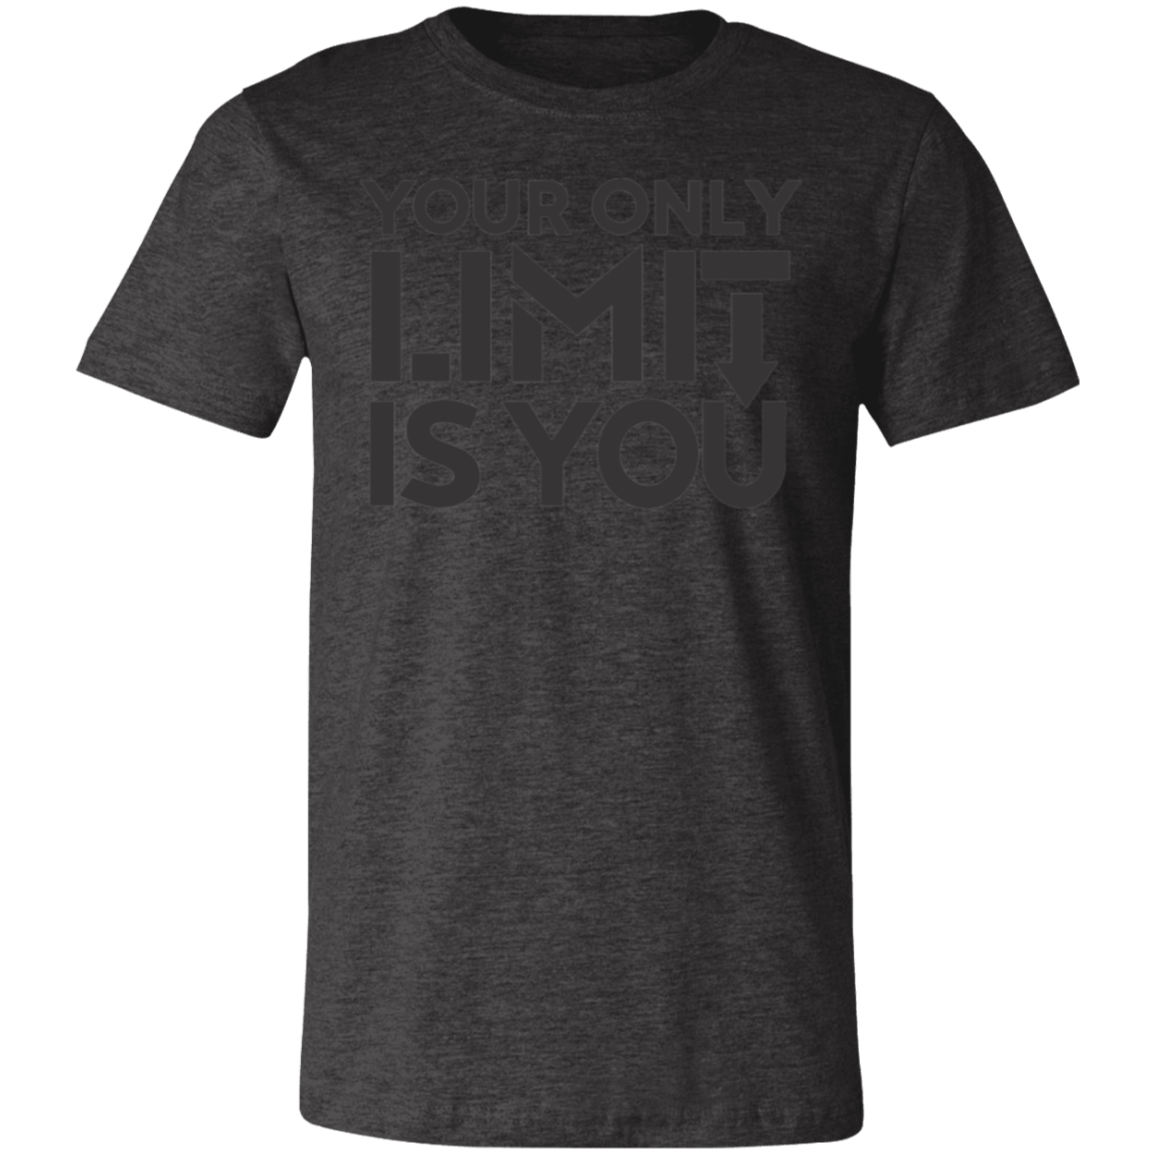 Your Only Limit is you Premium Women's Tee